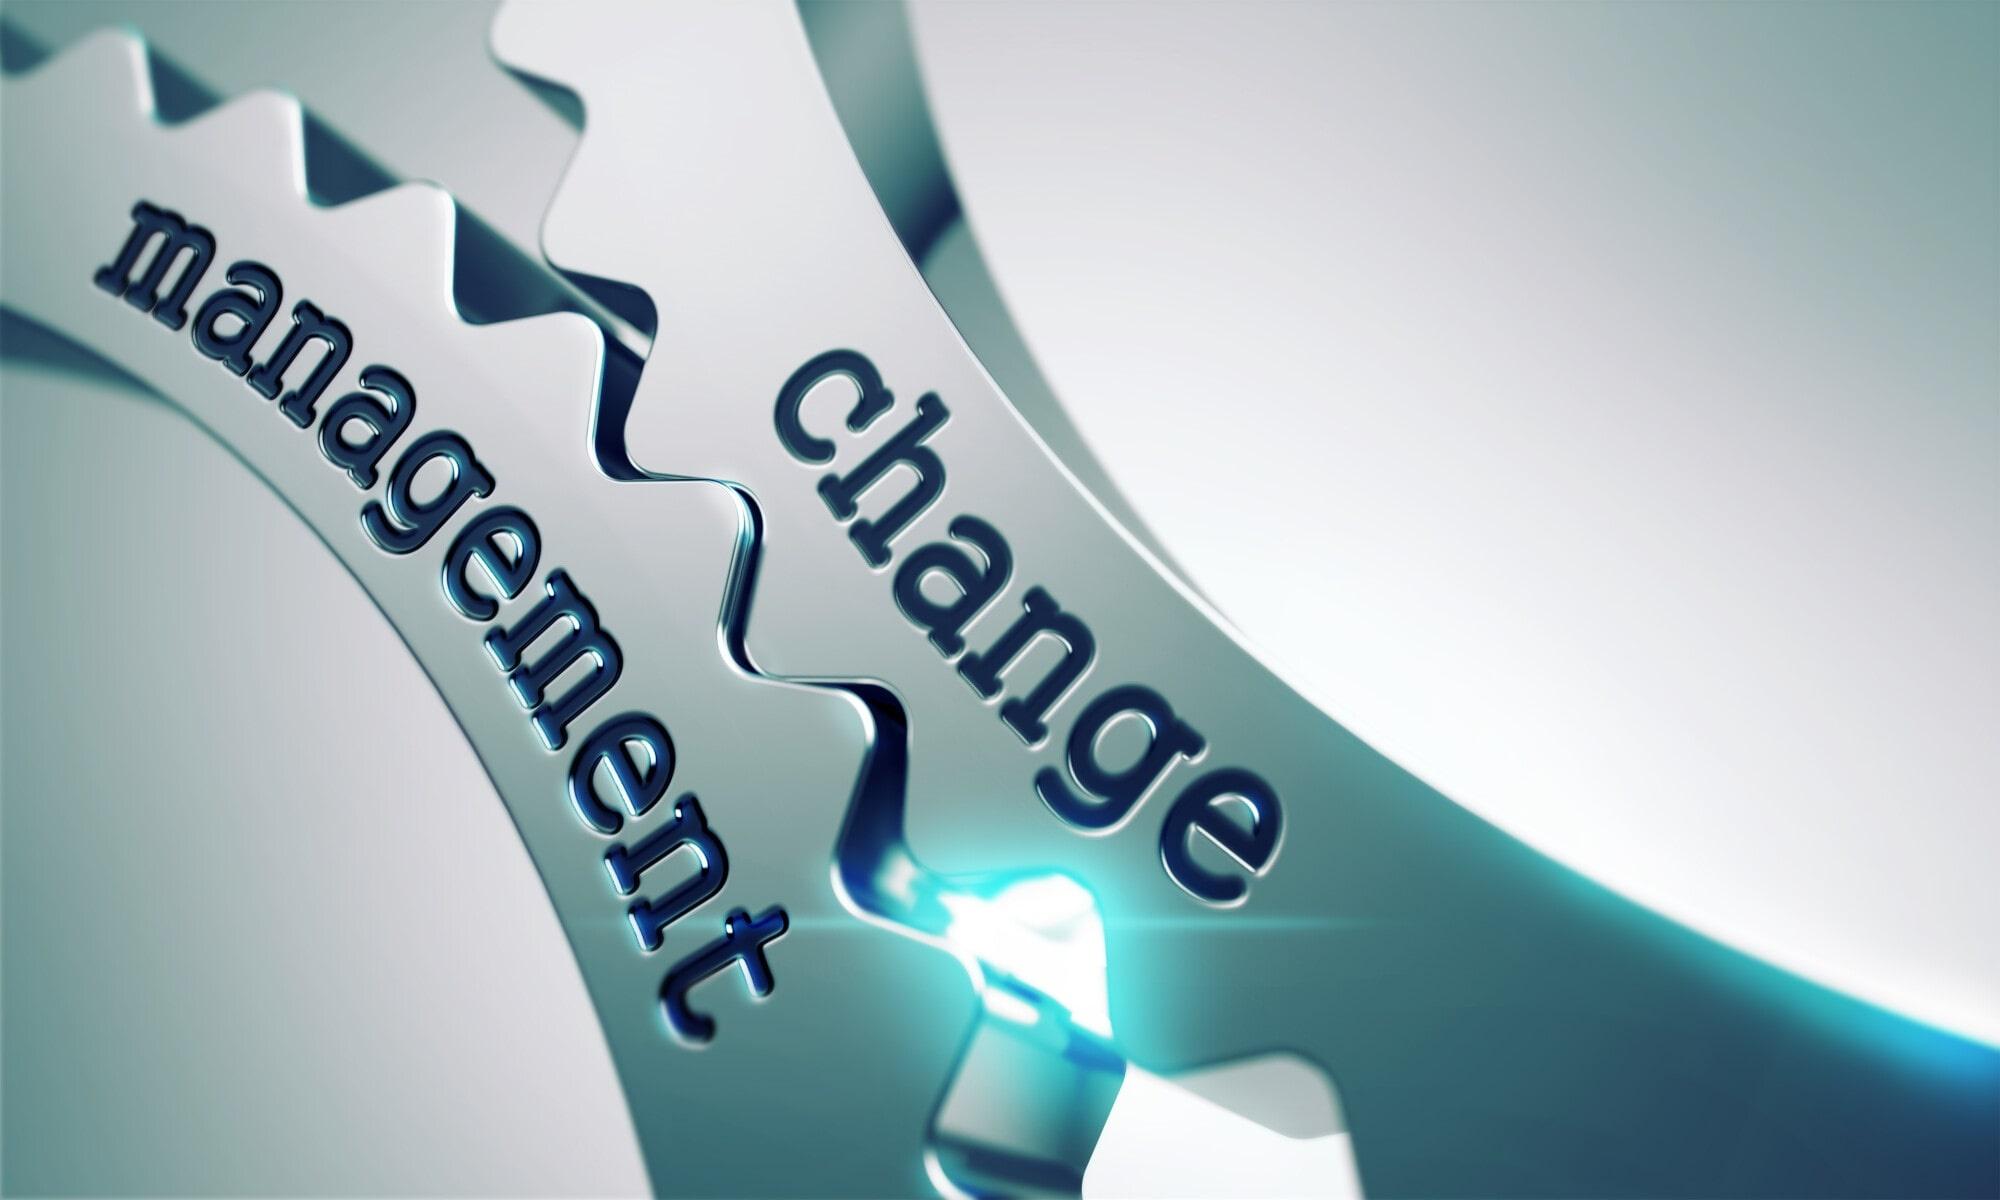 How Does a Change Management Process Help a Company